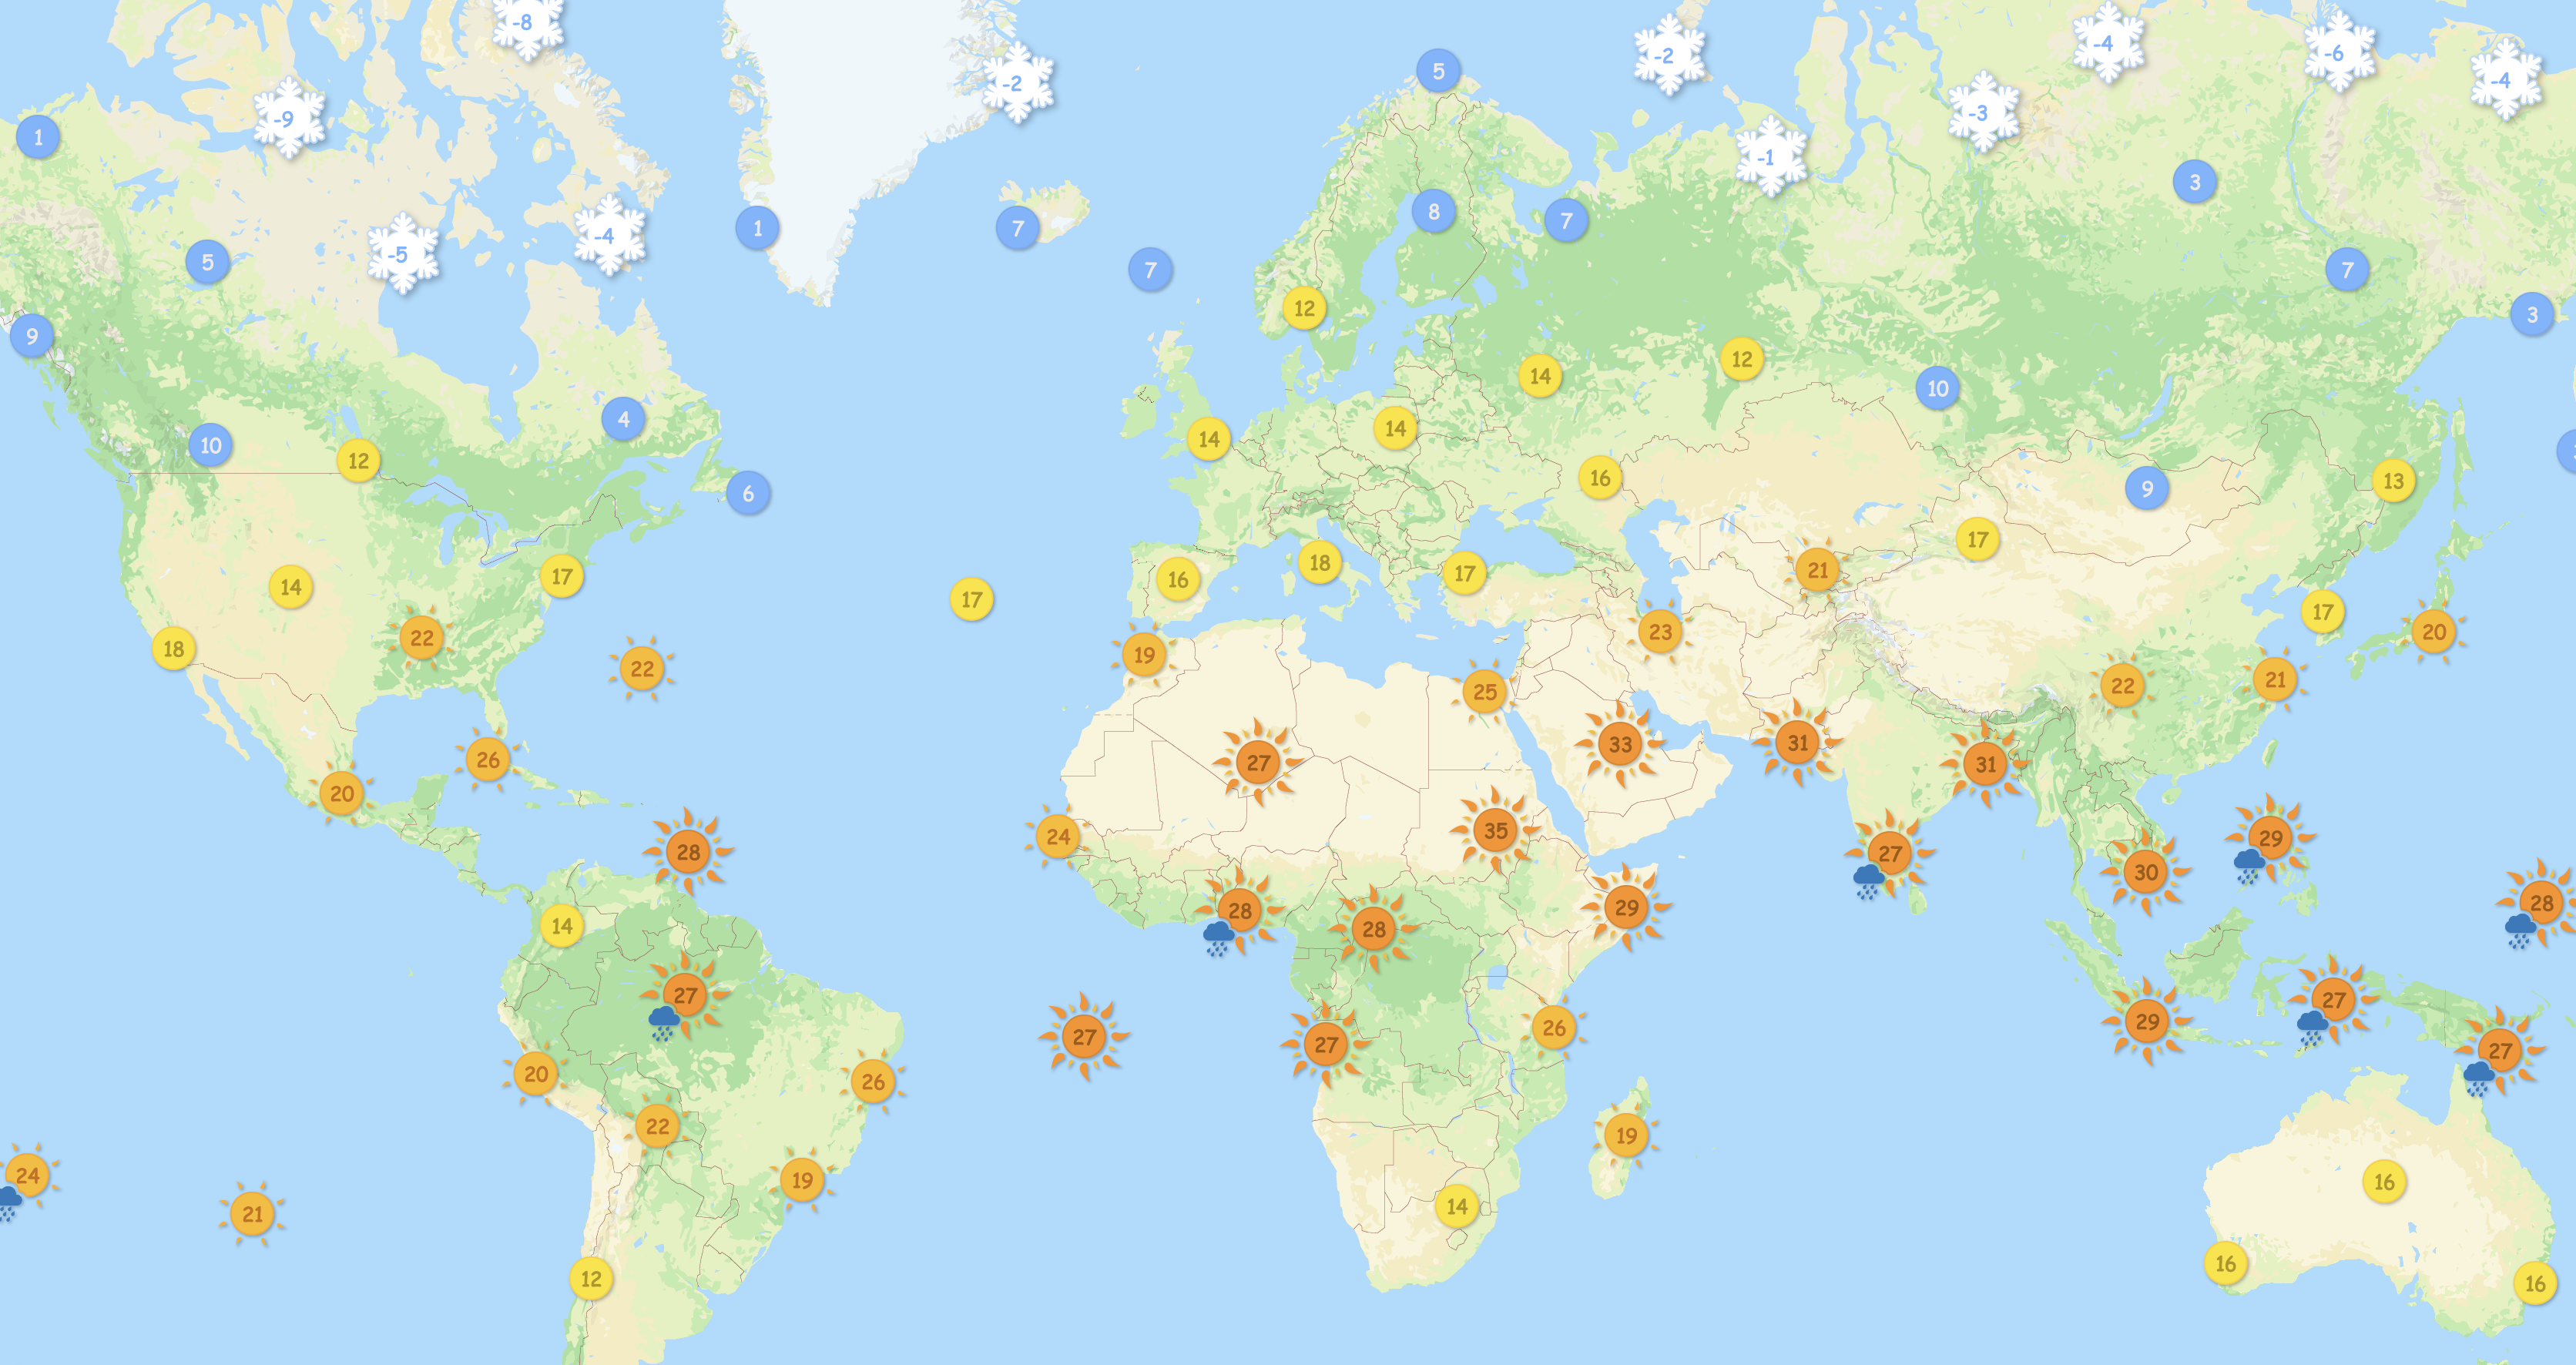 Interactive world map with temperature and rain icons